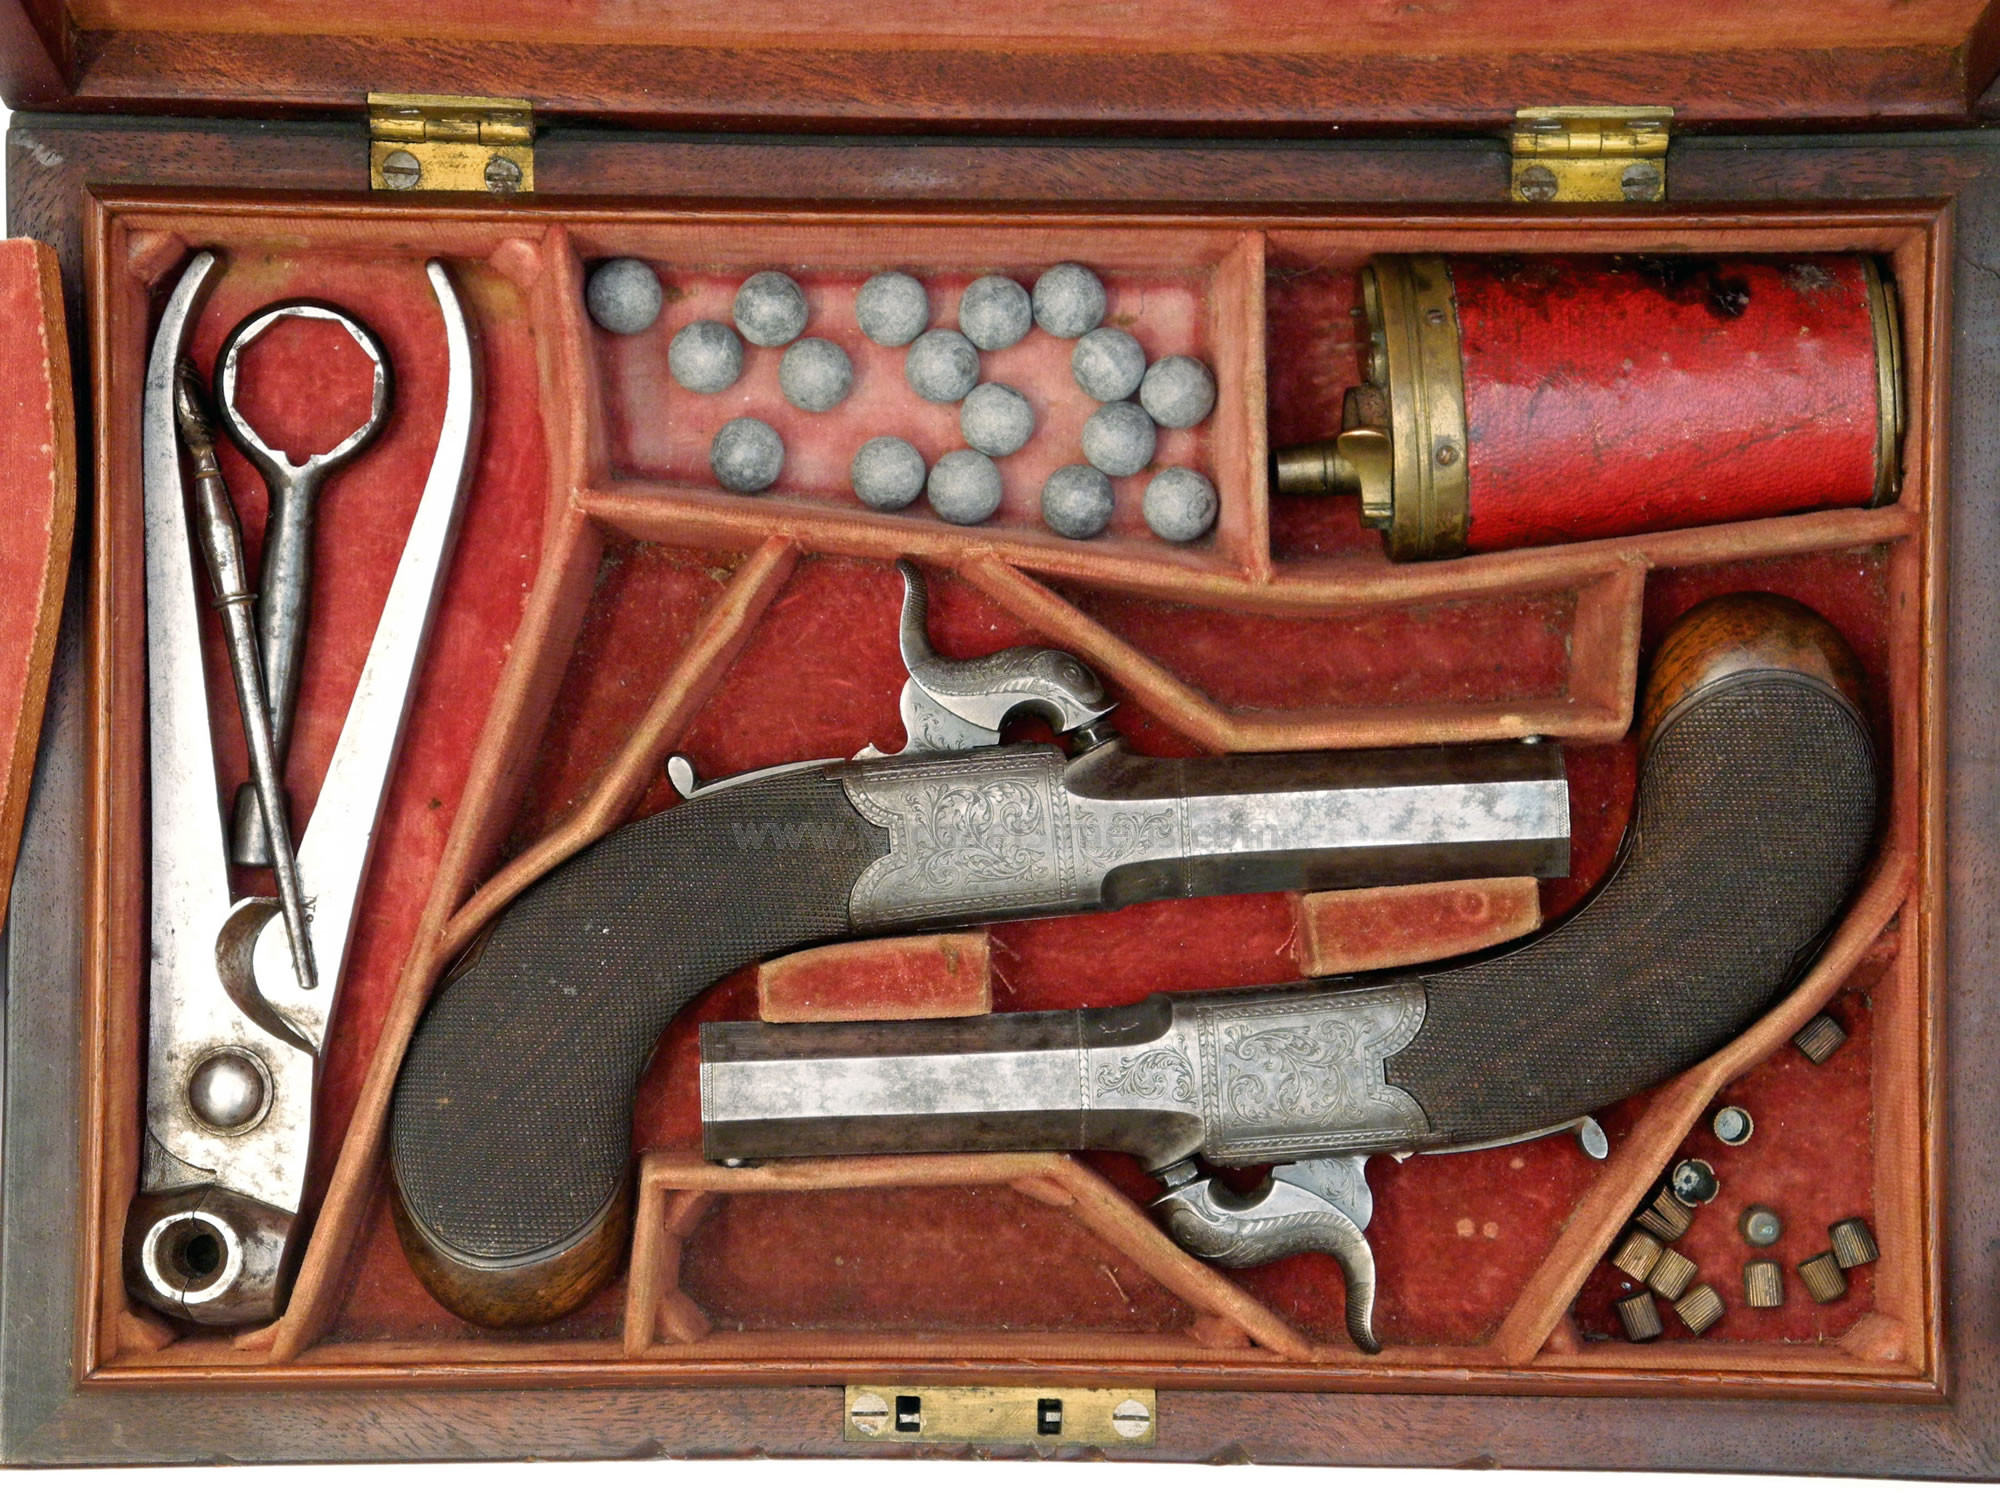 CASED MUFF PISTOLS BY T. HUTCHINSON, LONDON